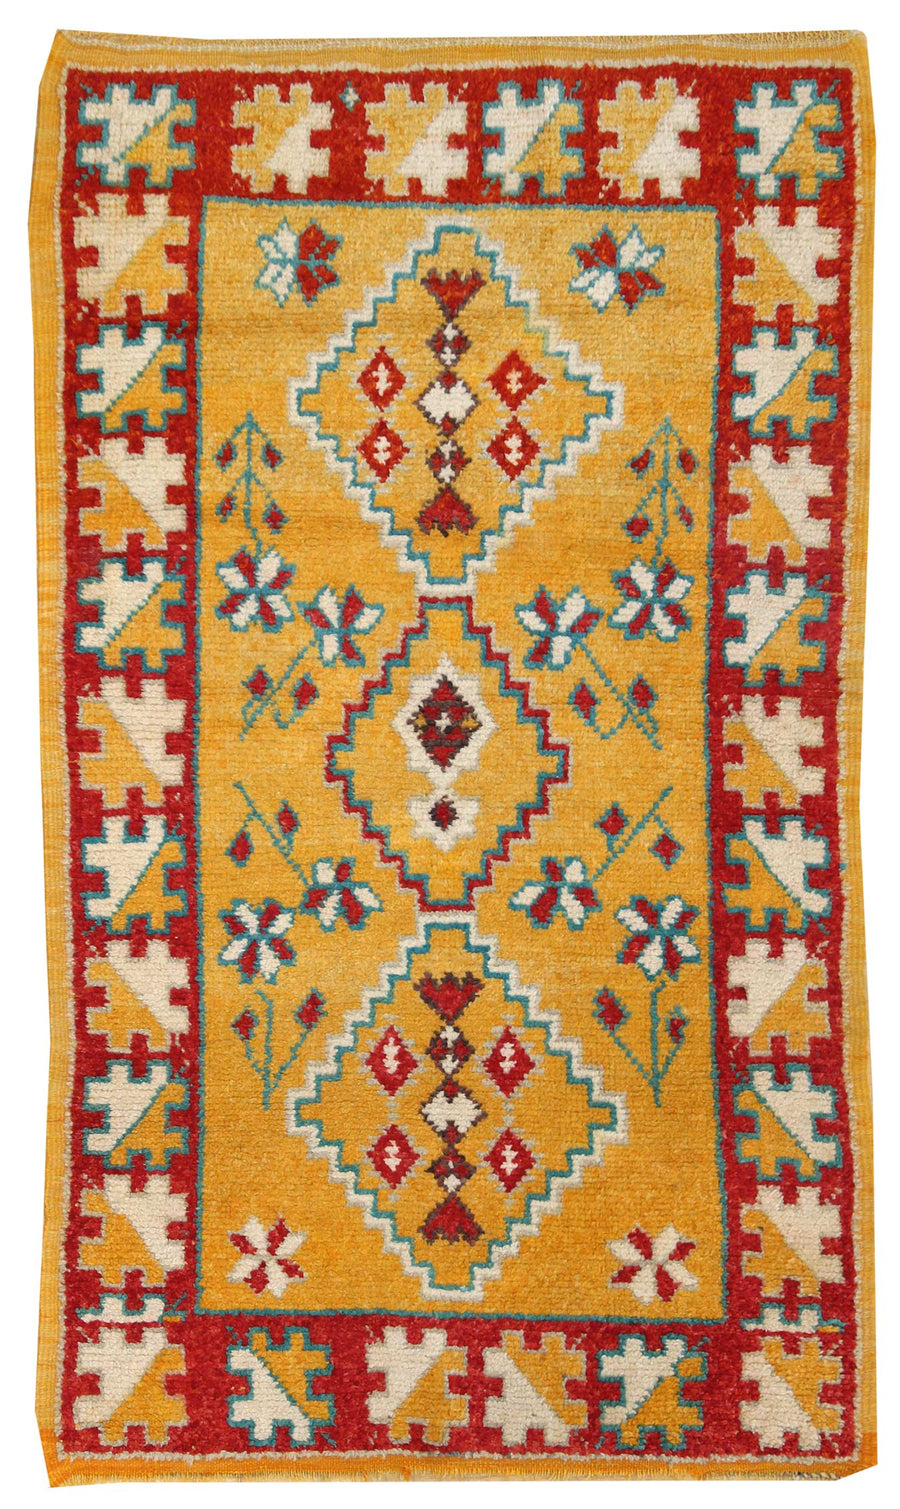 MOROCCAN HANDKNOTTED RUG, J50162